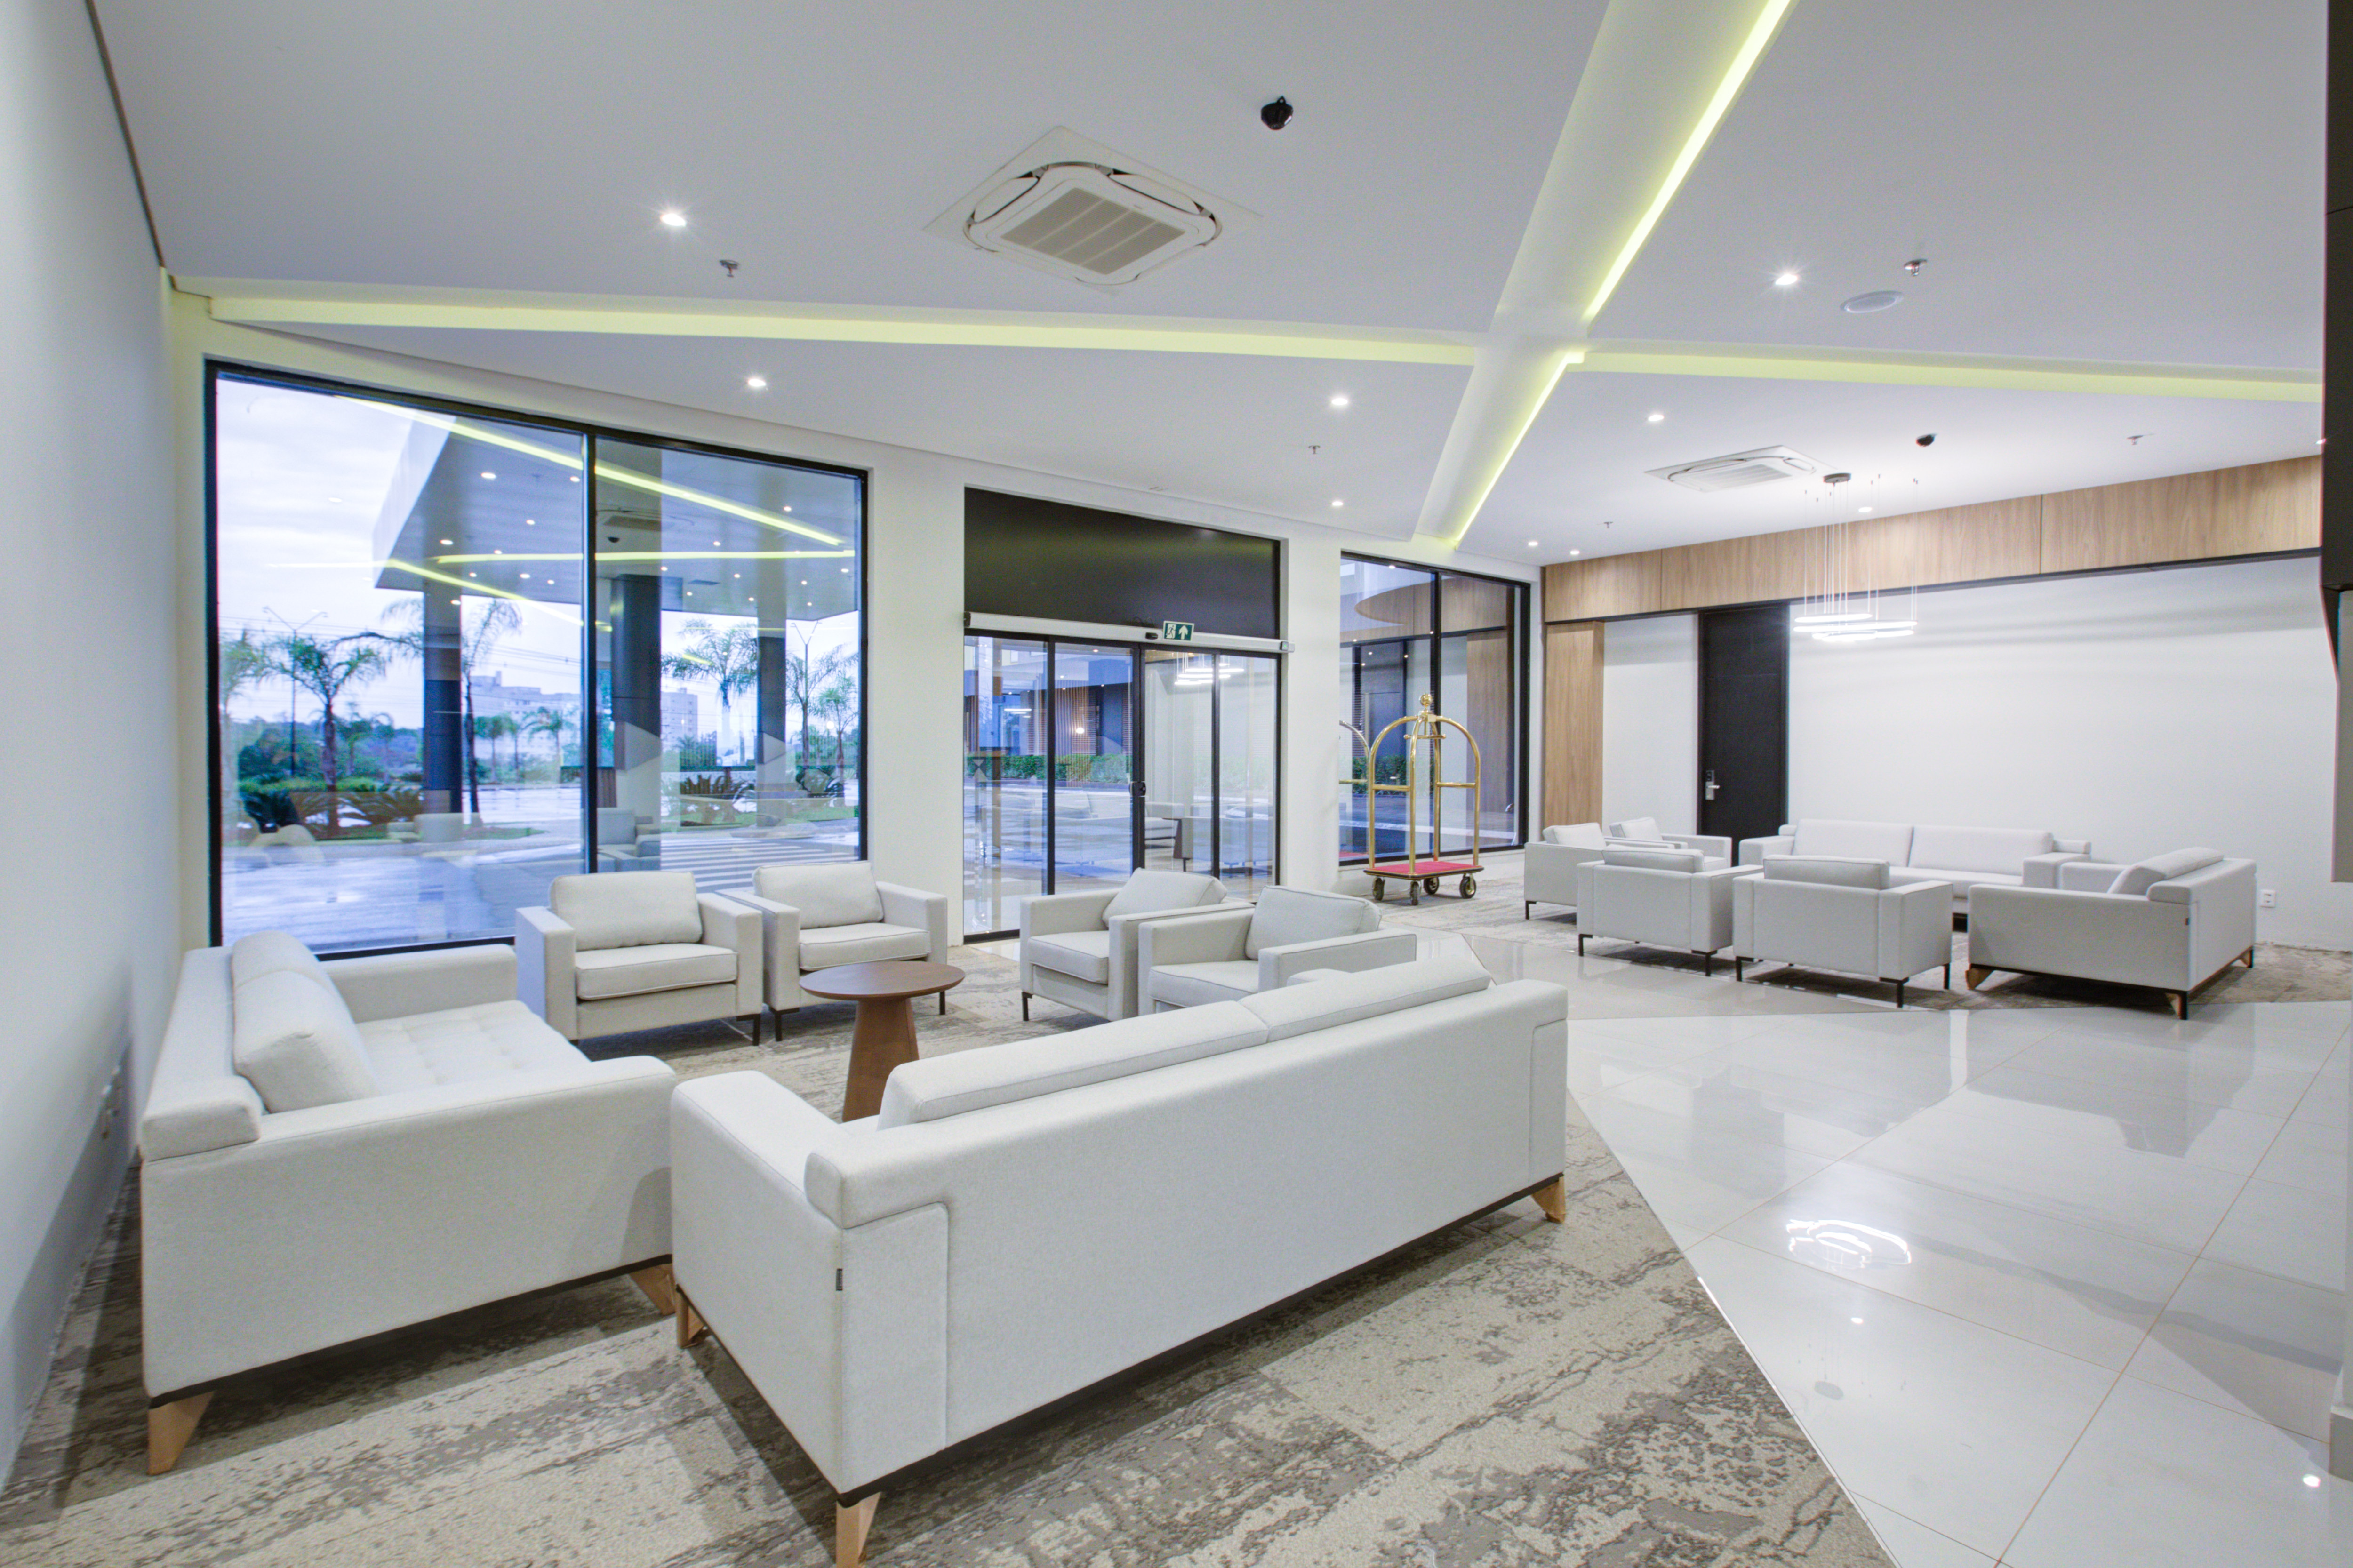 Lobby seating area with chairs and sofas